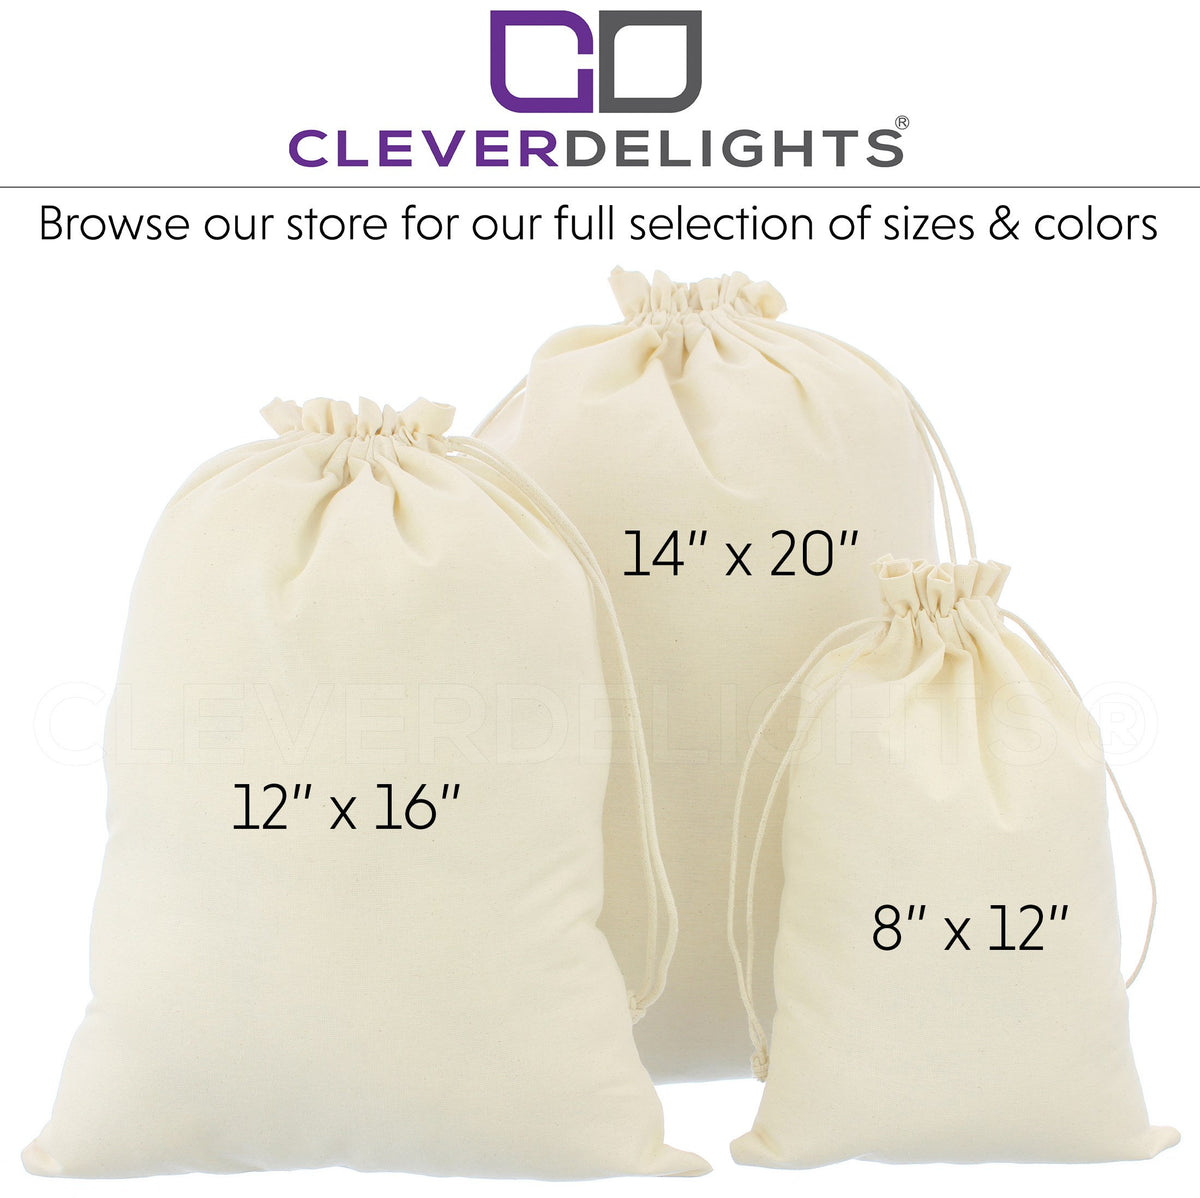 Bags - Cotton Muslin Crystal Life Technology Bags for crystals